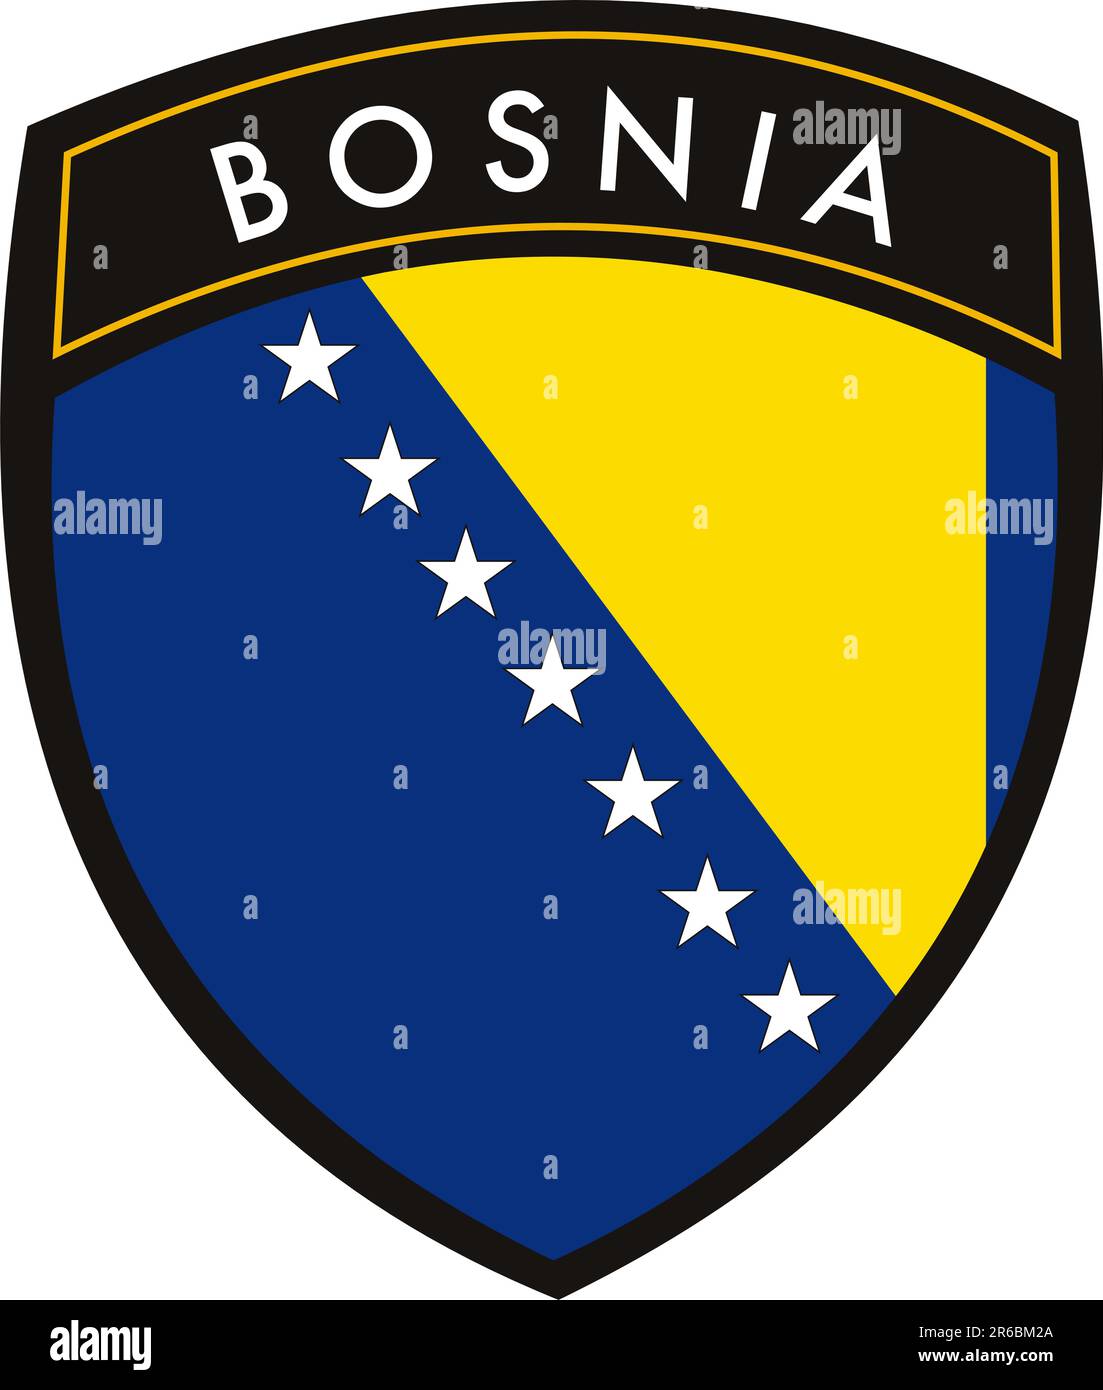 Bosnia vector crest flag on withe background Stock Vector